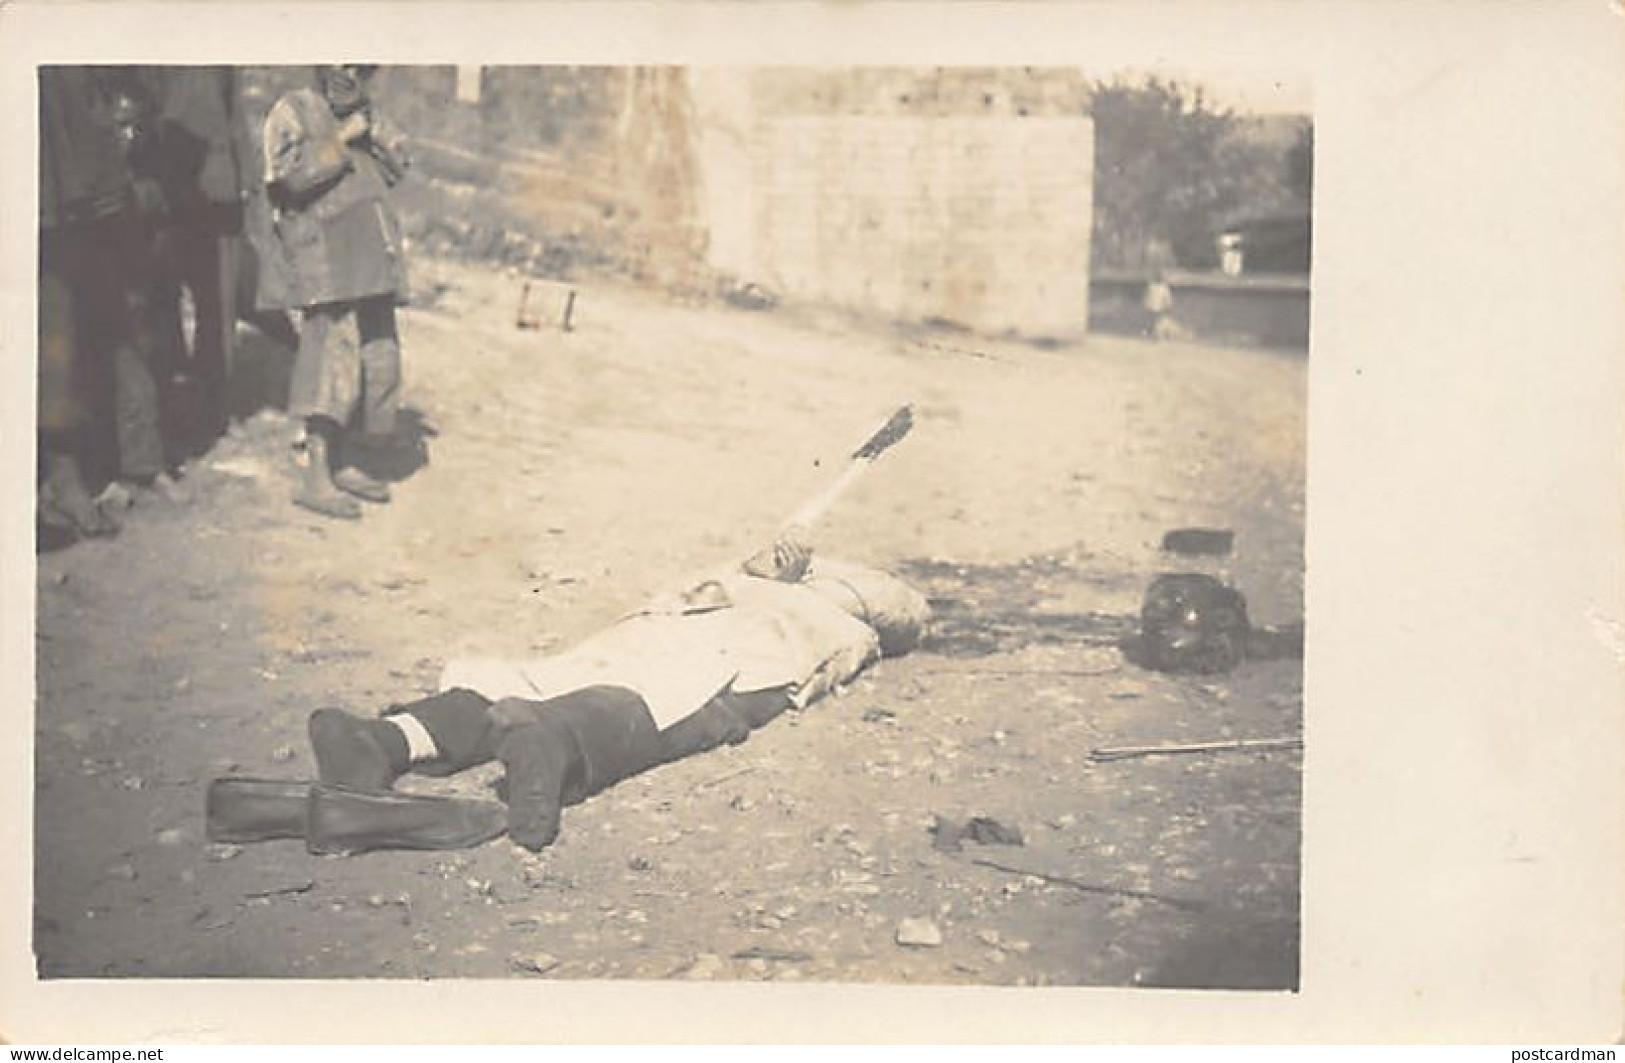 China - YUNNAN - Execution off the wall of Mengzi City - Set of 8 Real Photo postcards - Publisher unknown (Collection Y